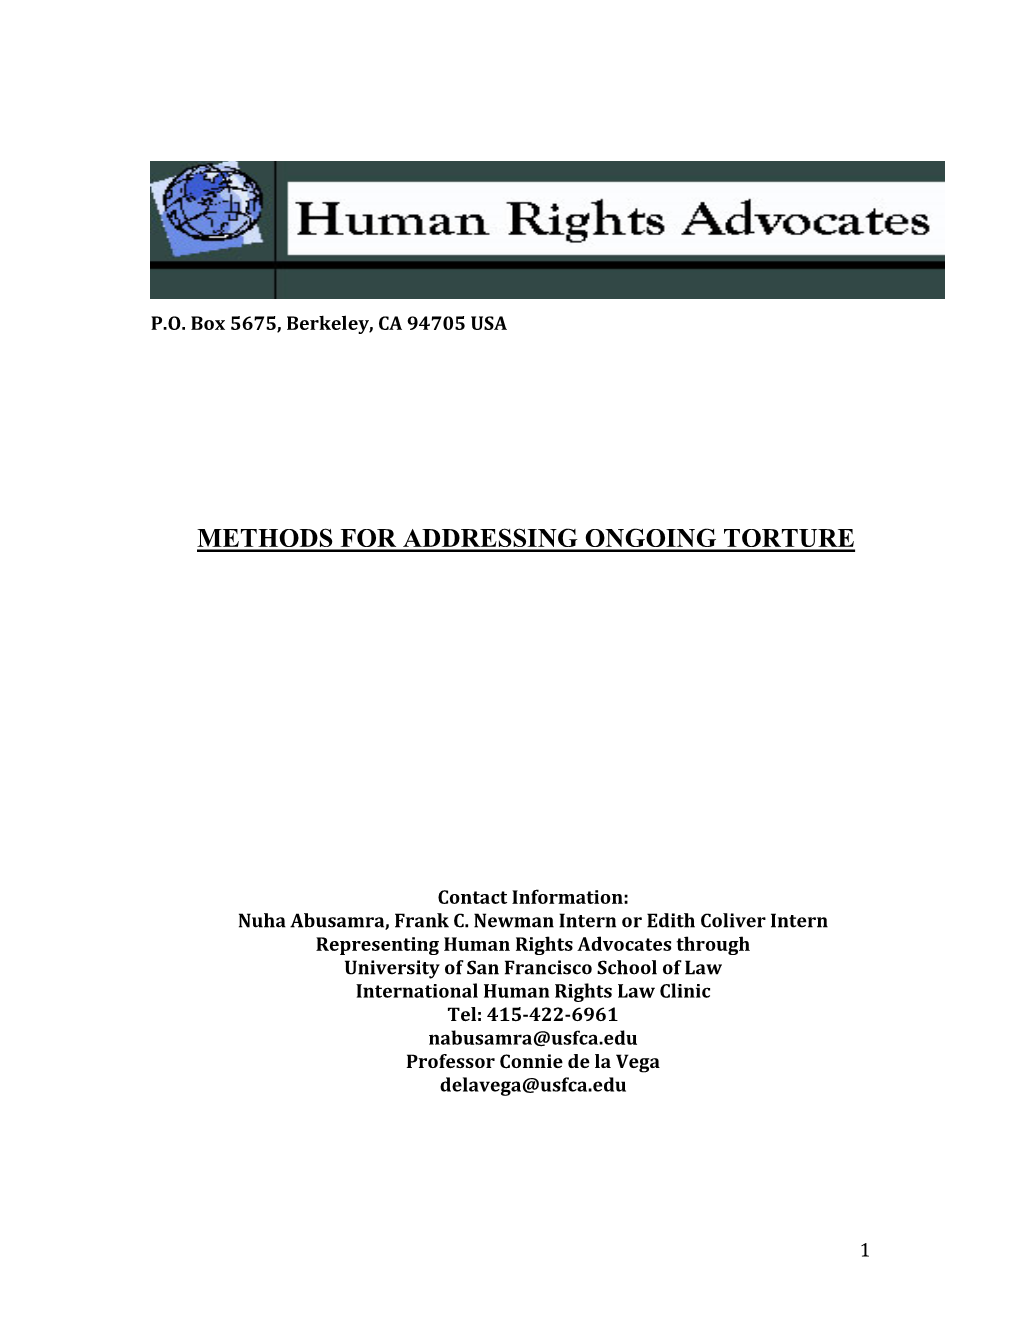 Methods for Addressing Ongoing Torture